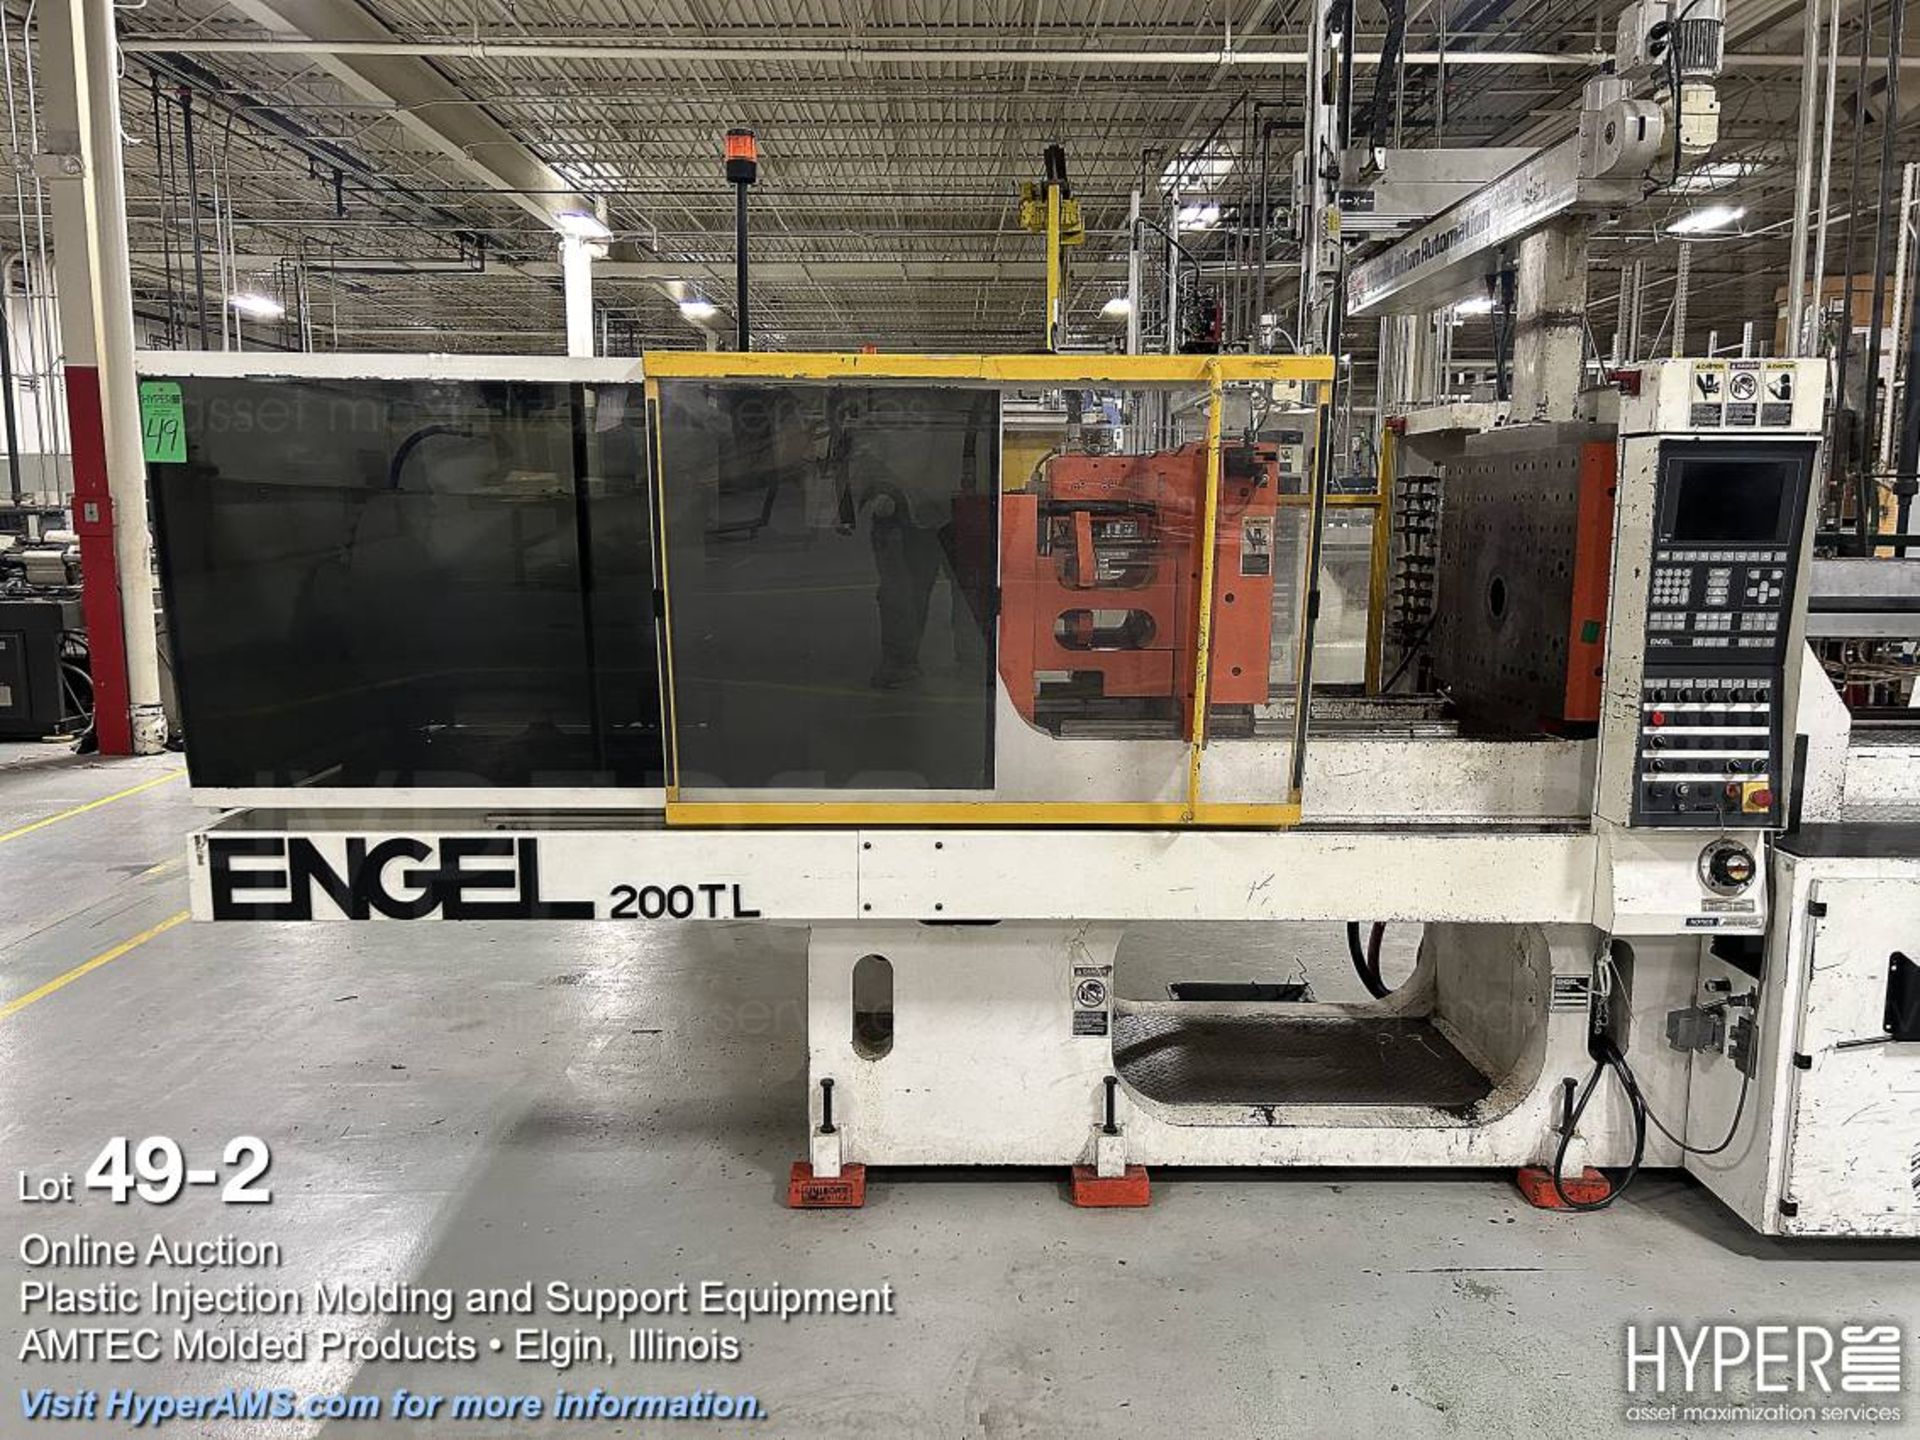 Engel ES1050/200TL toggle clamp plastic injection molding machine - Image 2 of 24